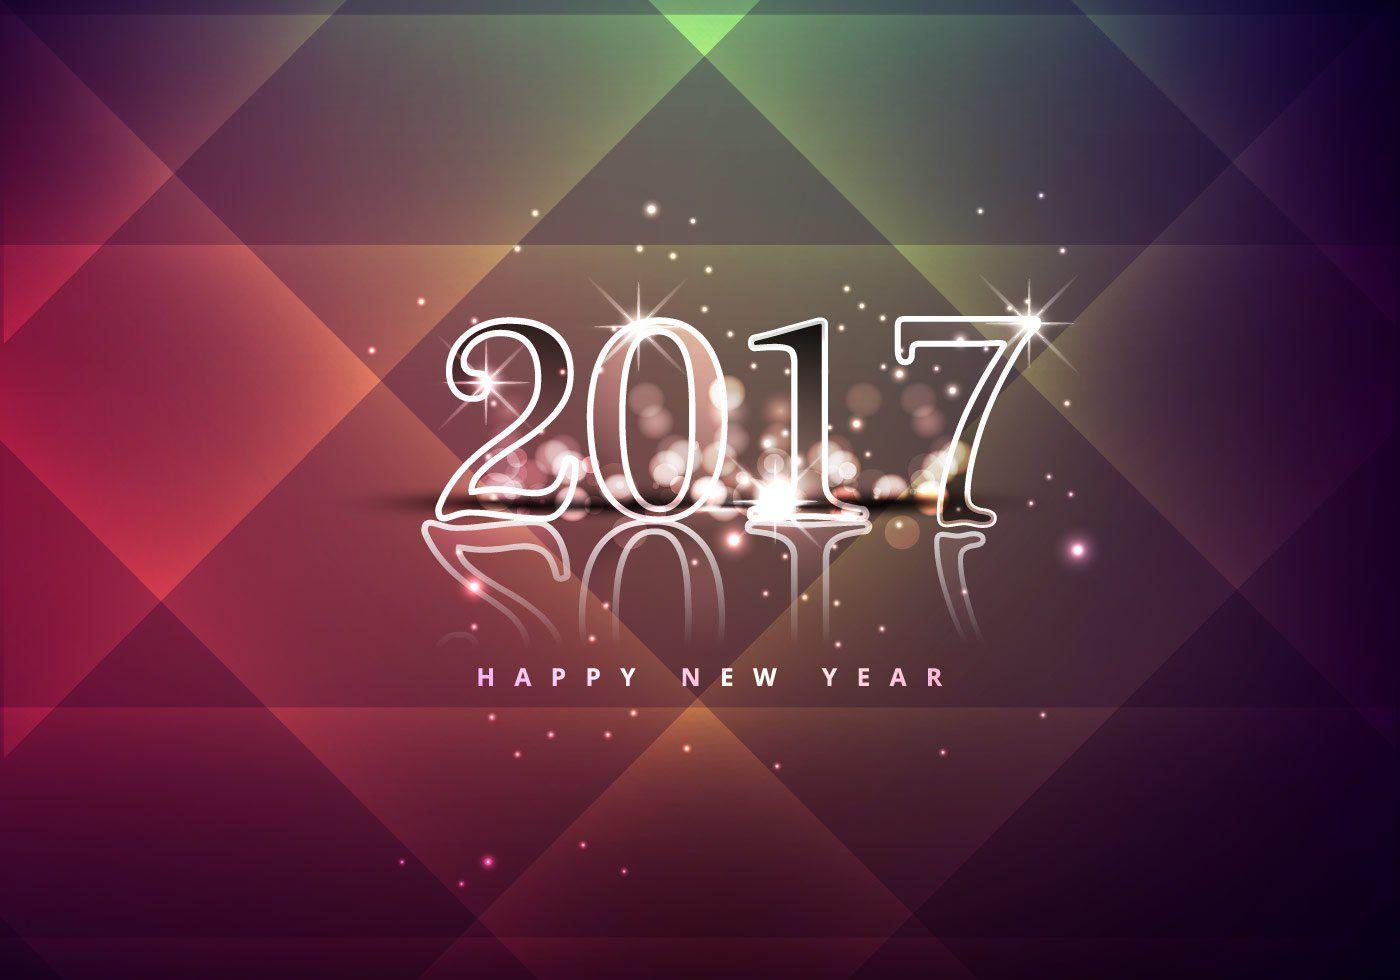 Year 2017 Logo - Happy New Year Wallpapers HD Backgrounds, Images, Pics, Photos Free ...